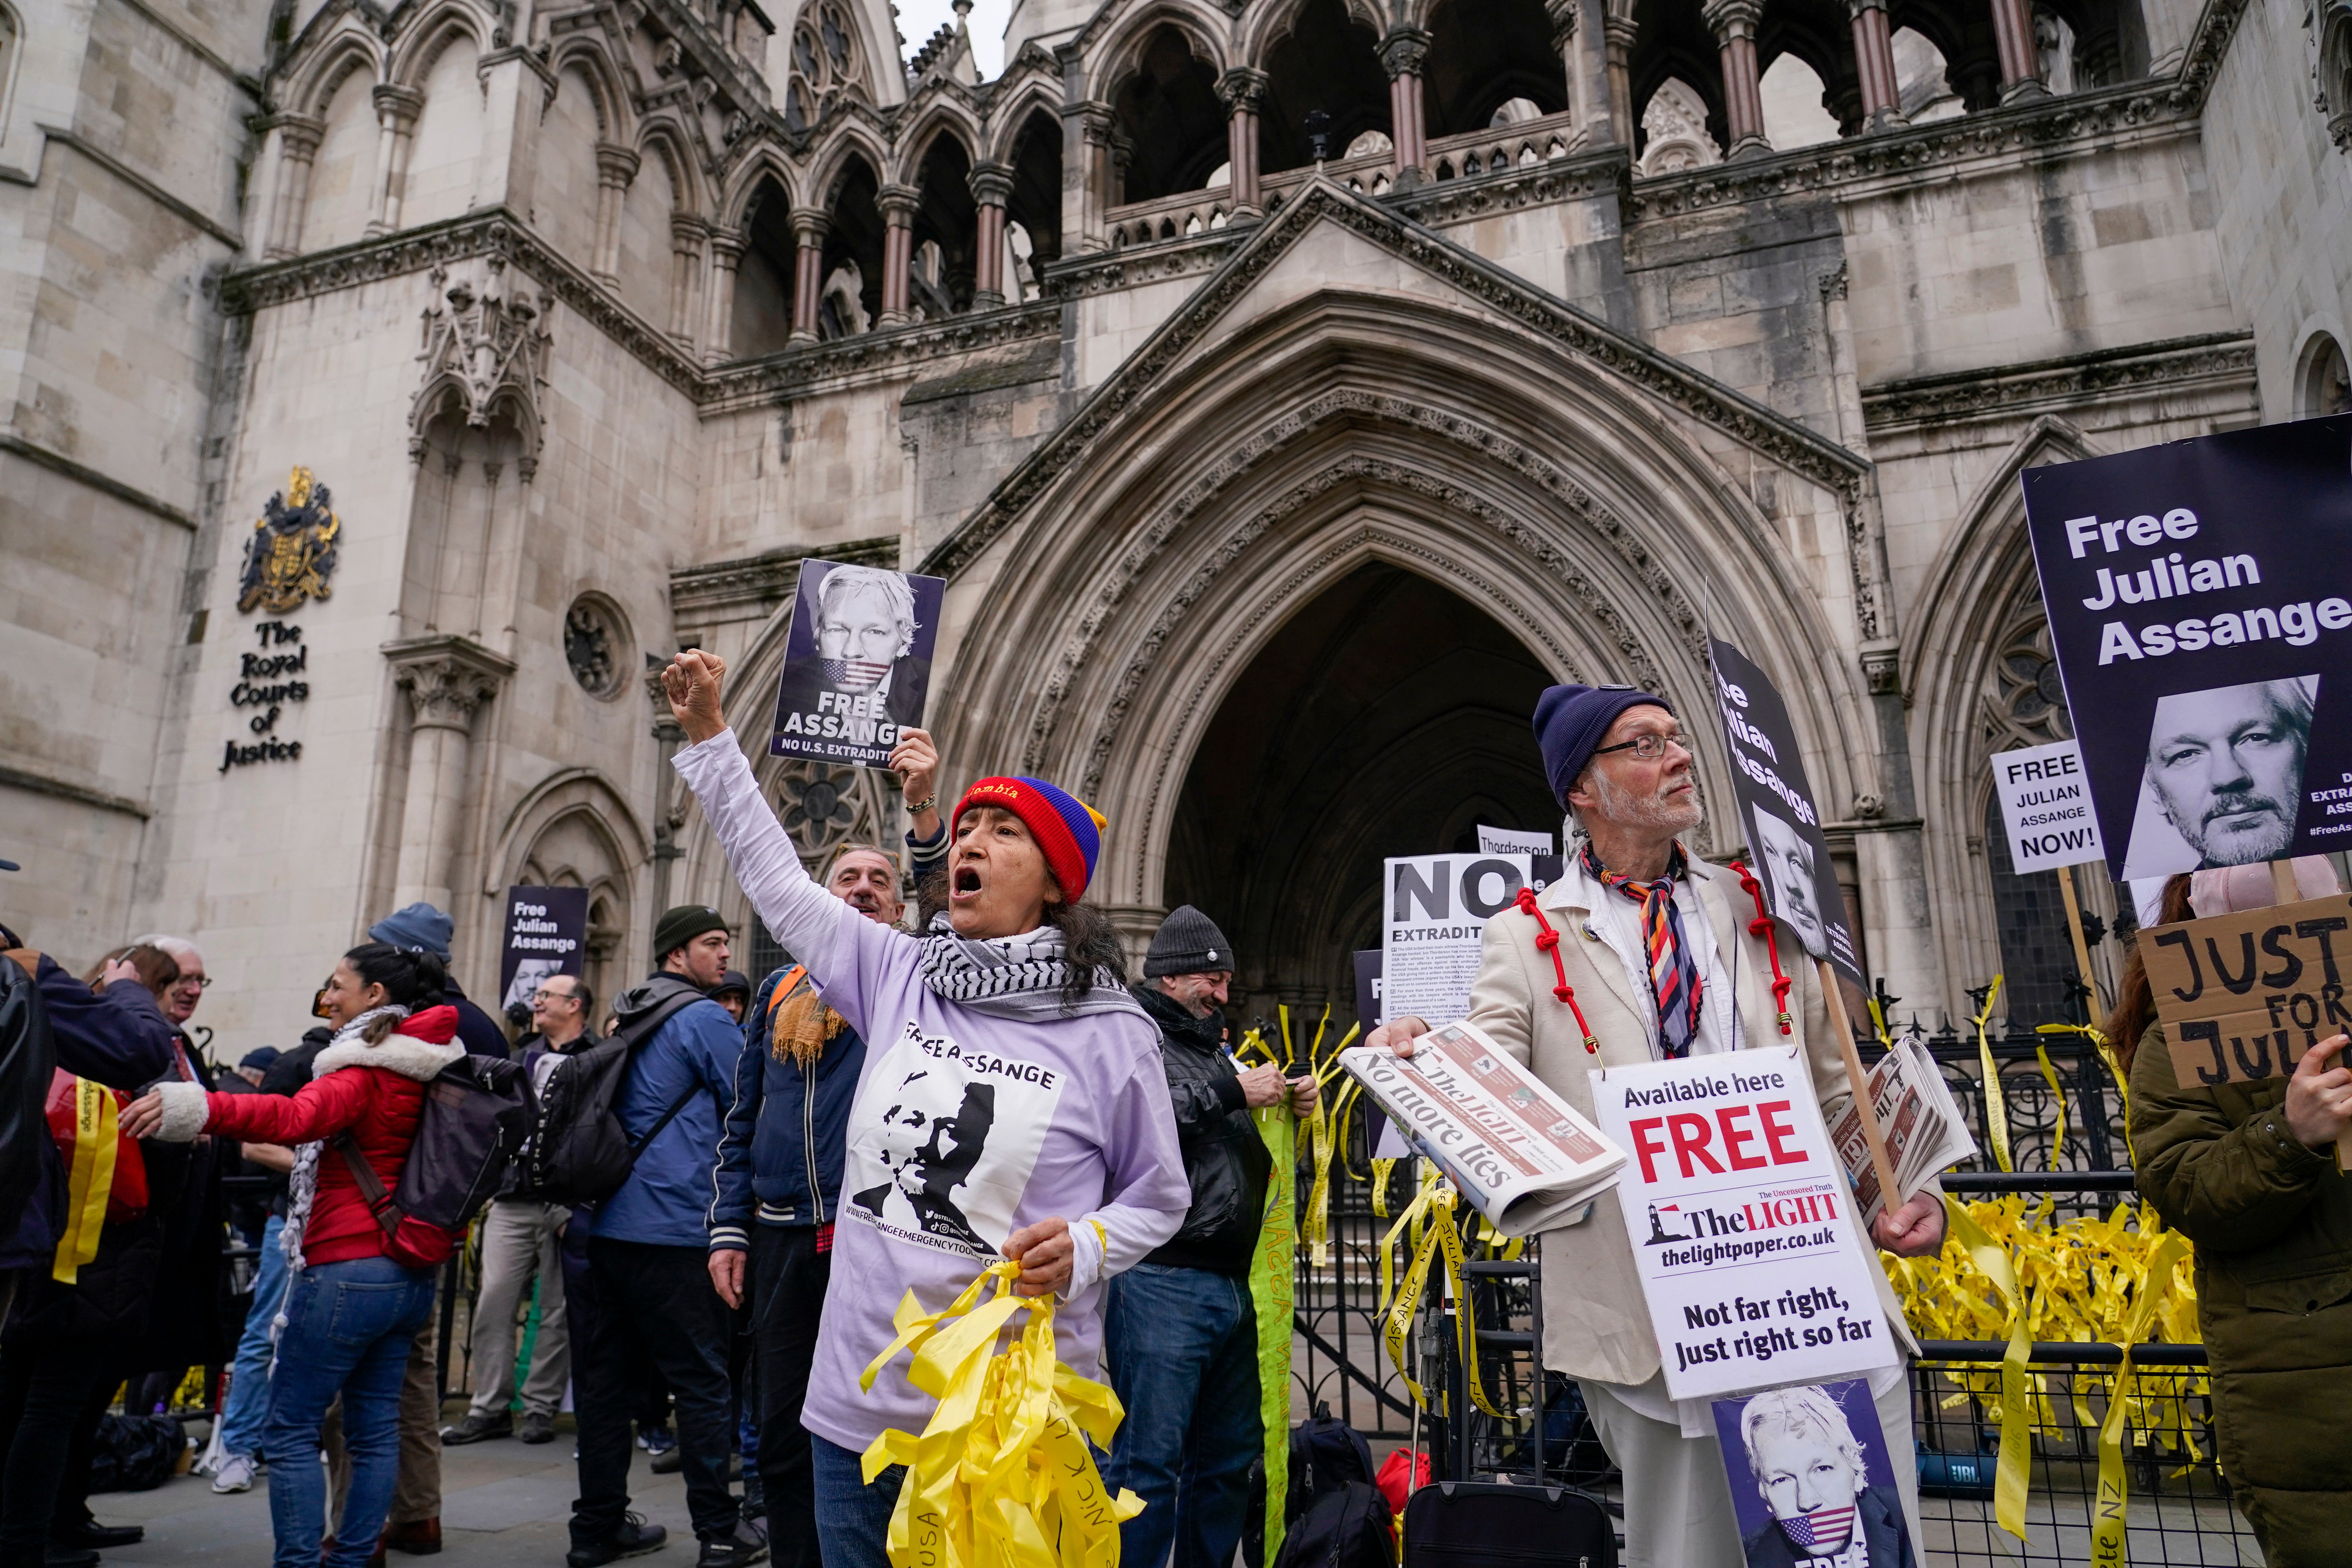 Protesters chant in support of Julian Assange ahead of his appeal hearing at the Royal Courts of Justice on Tuesday